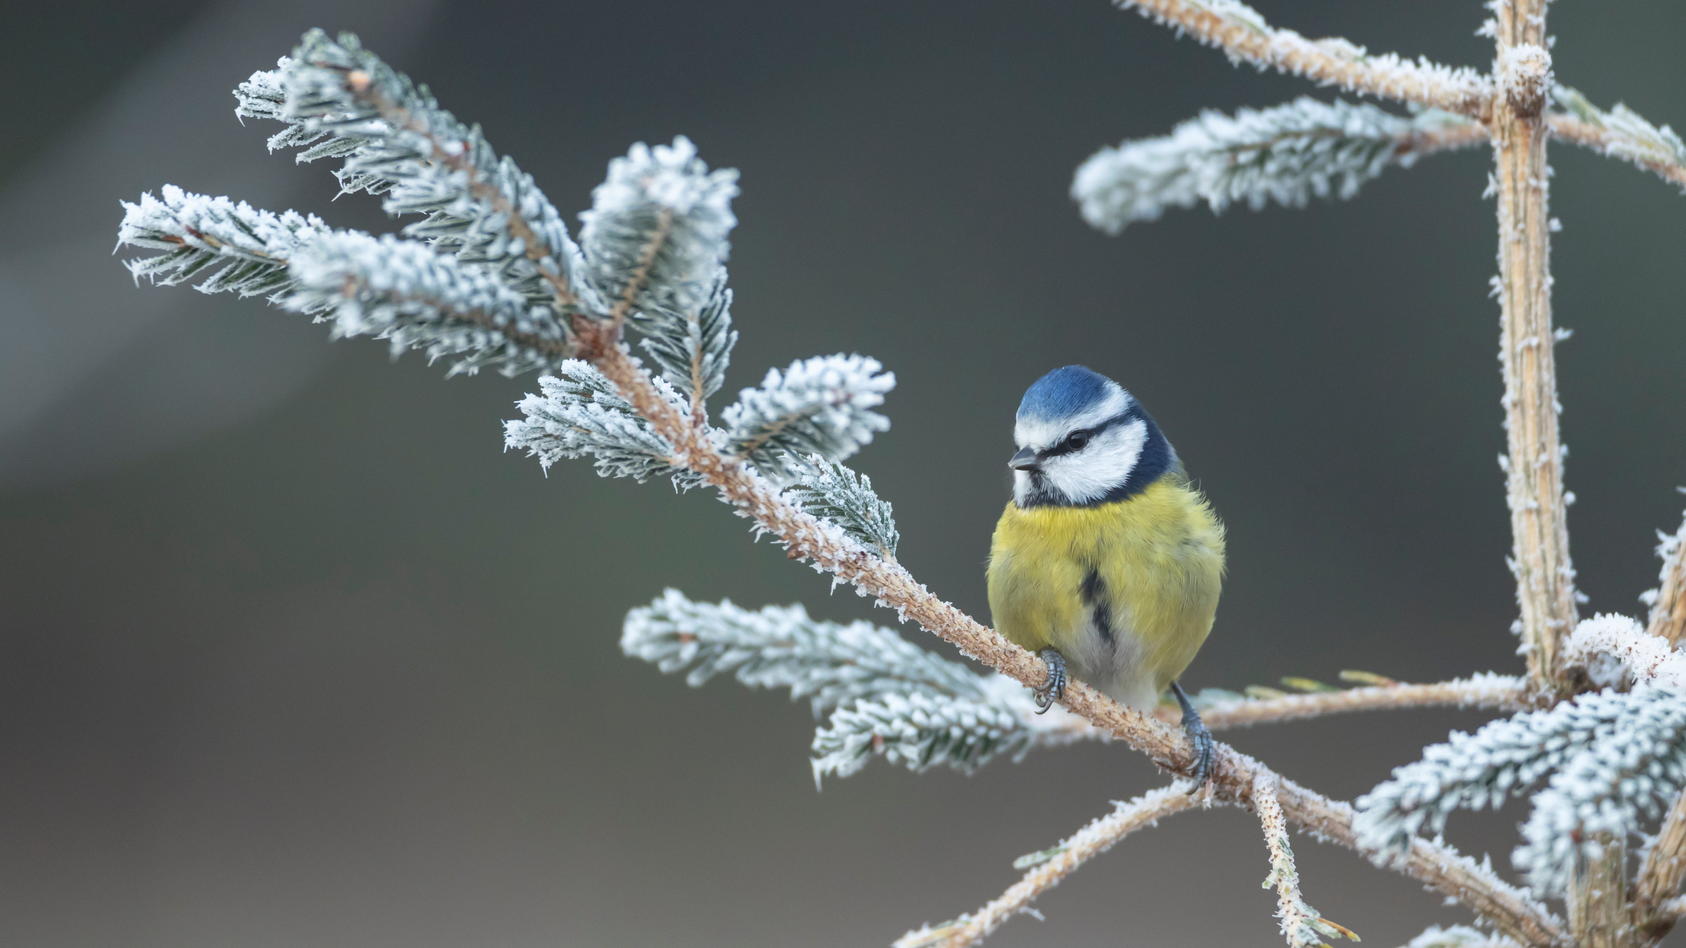 https://ais.wetter.de/masters/1962207/1686x0/sonderkonditionen-satzpreis-blue-tit-in-a-frost-covered-garden-christmas-tree-suffolk-england-united-kingdom-december-see-swns-story-swnaweather-action-press.jpg